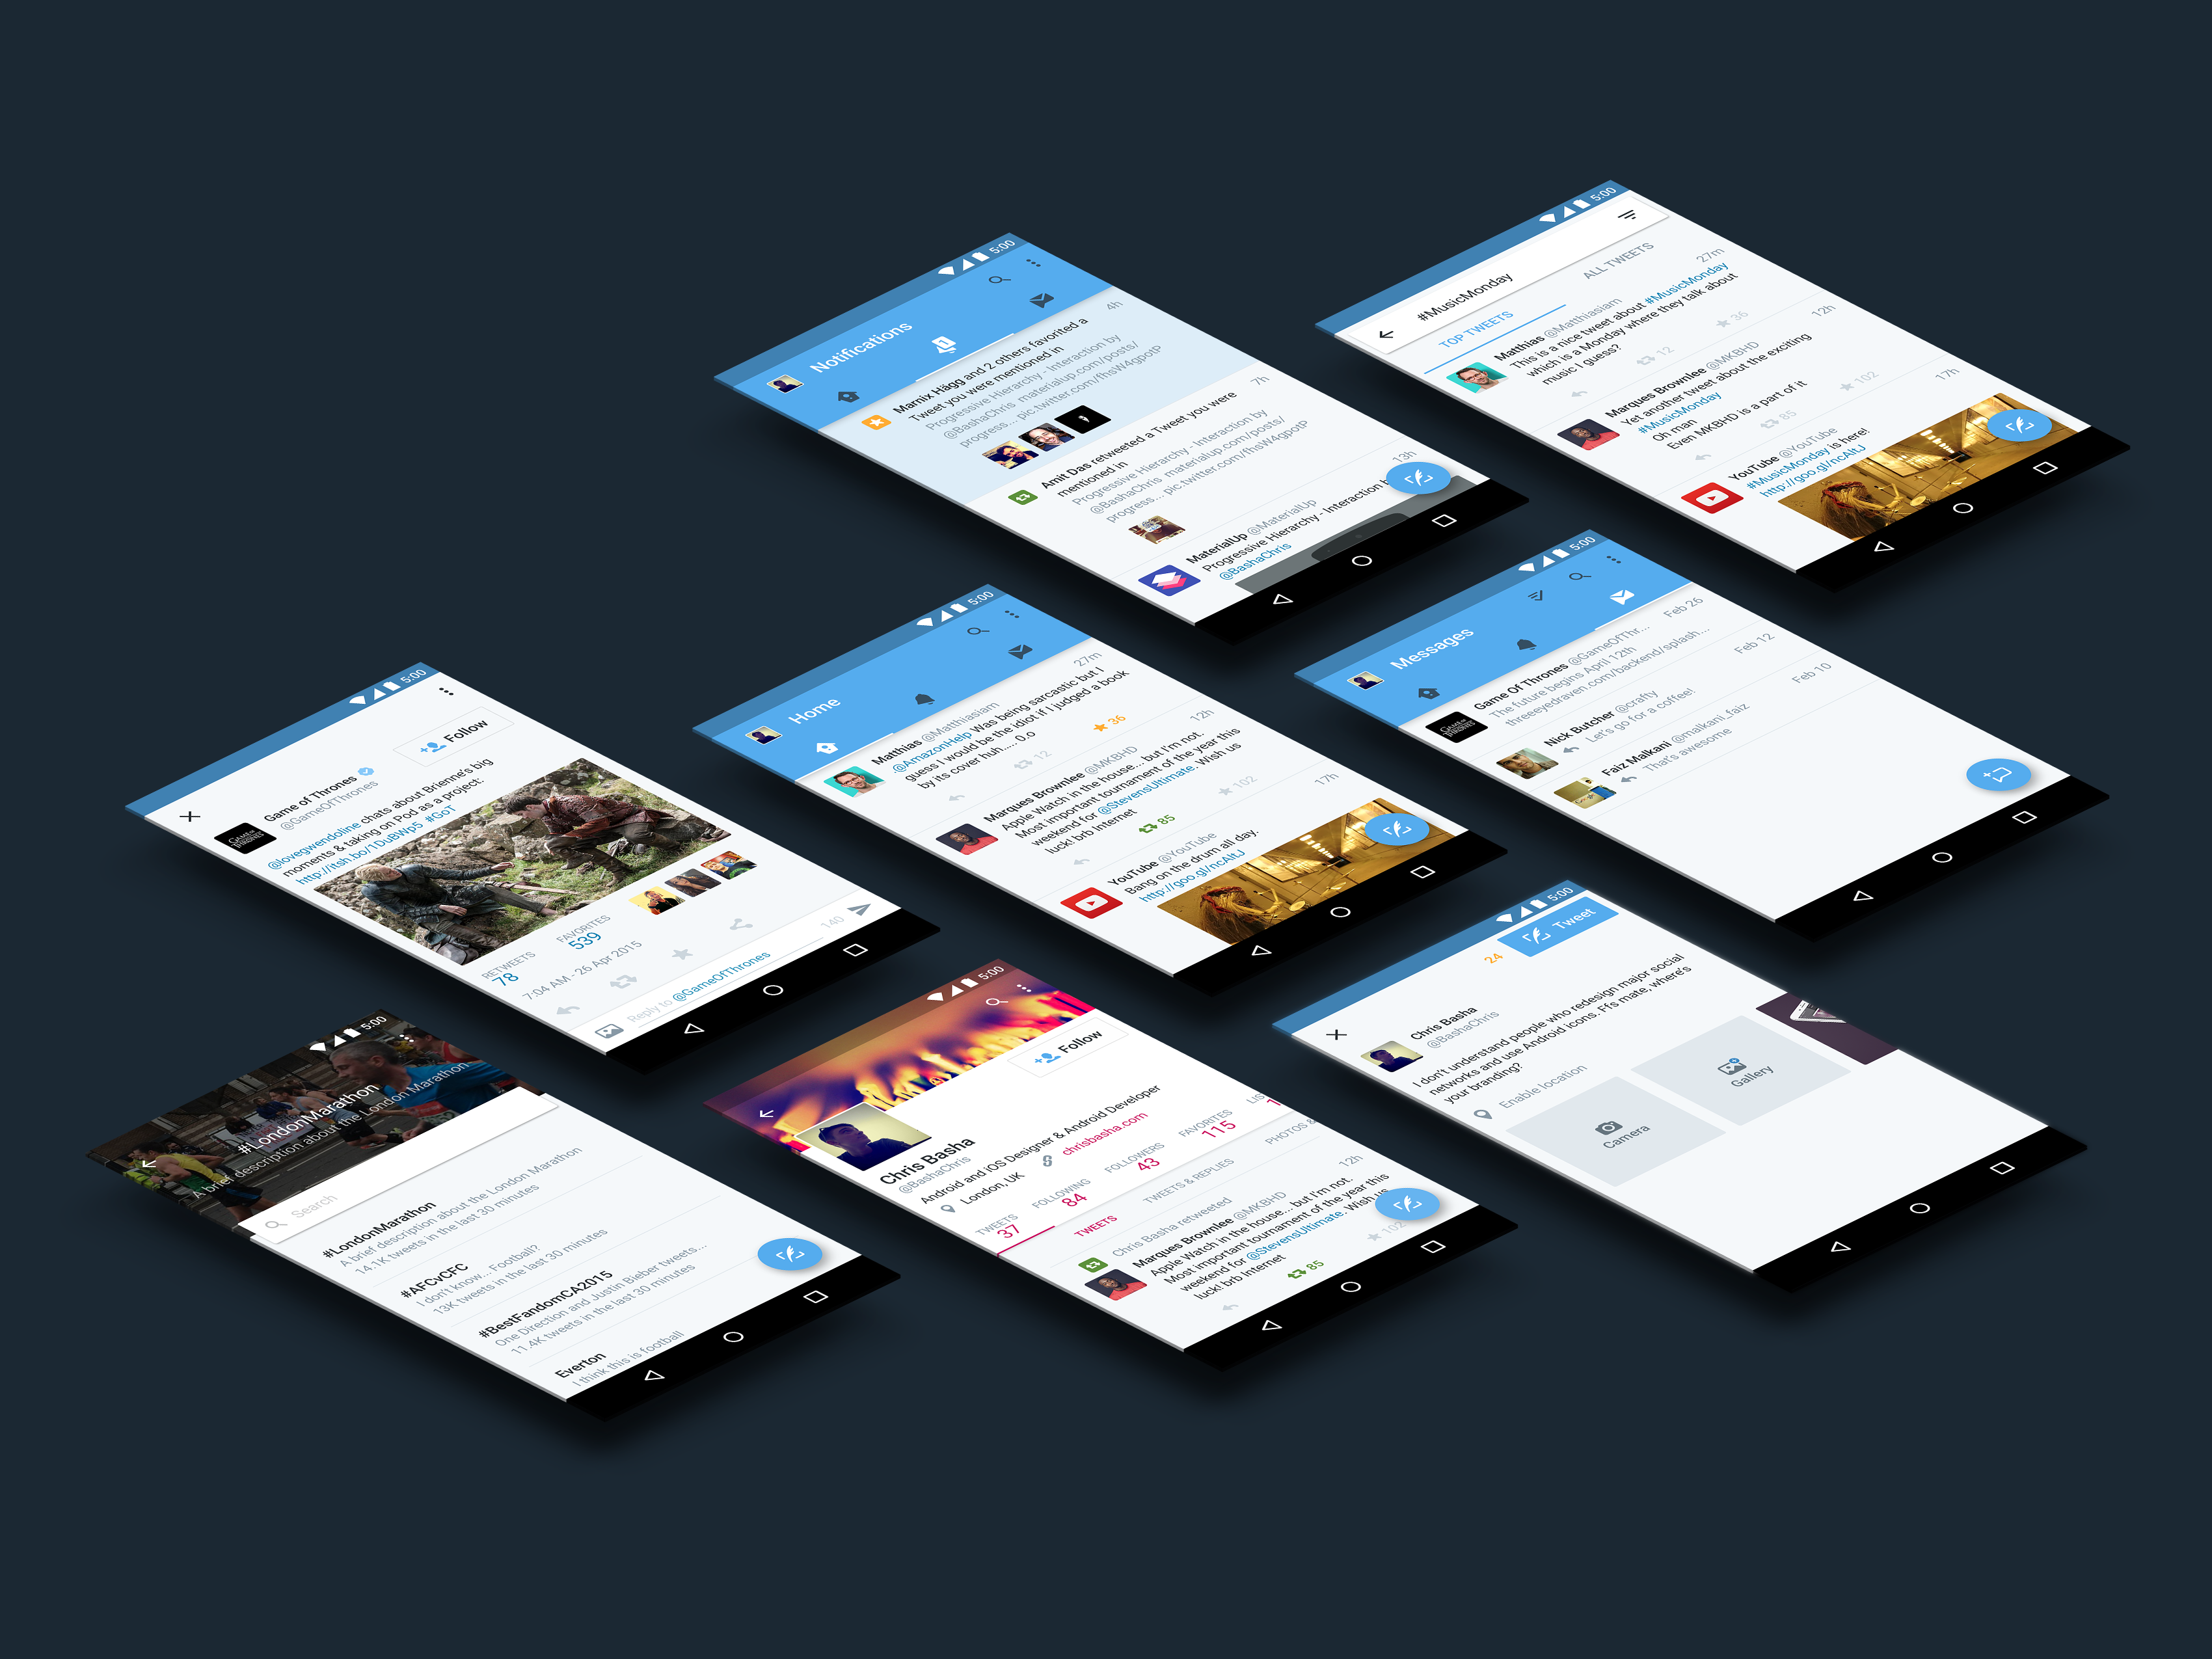 Twitter is overhauling its app design and the first change is